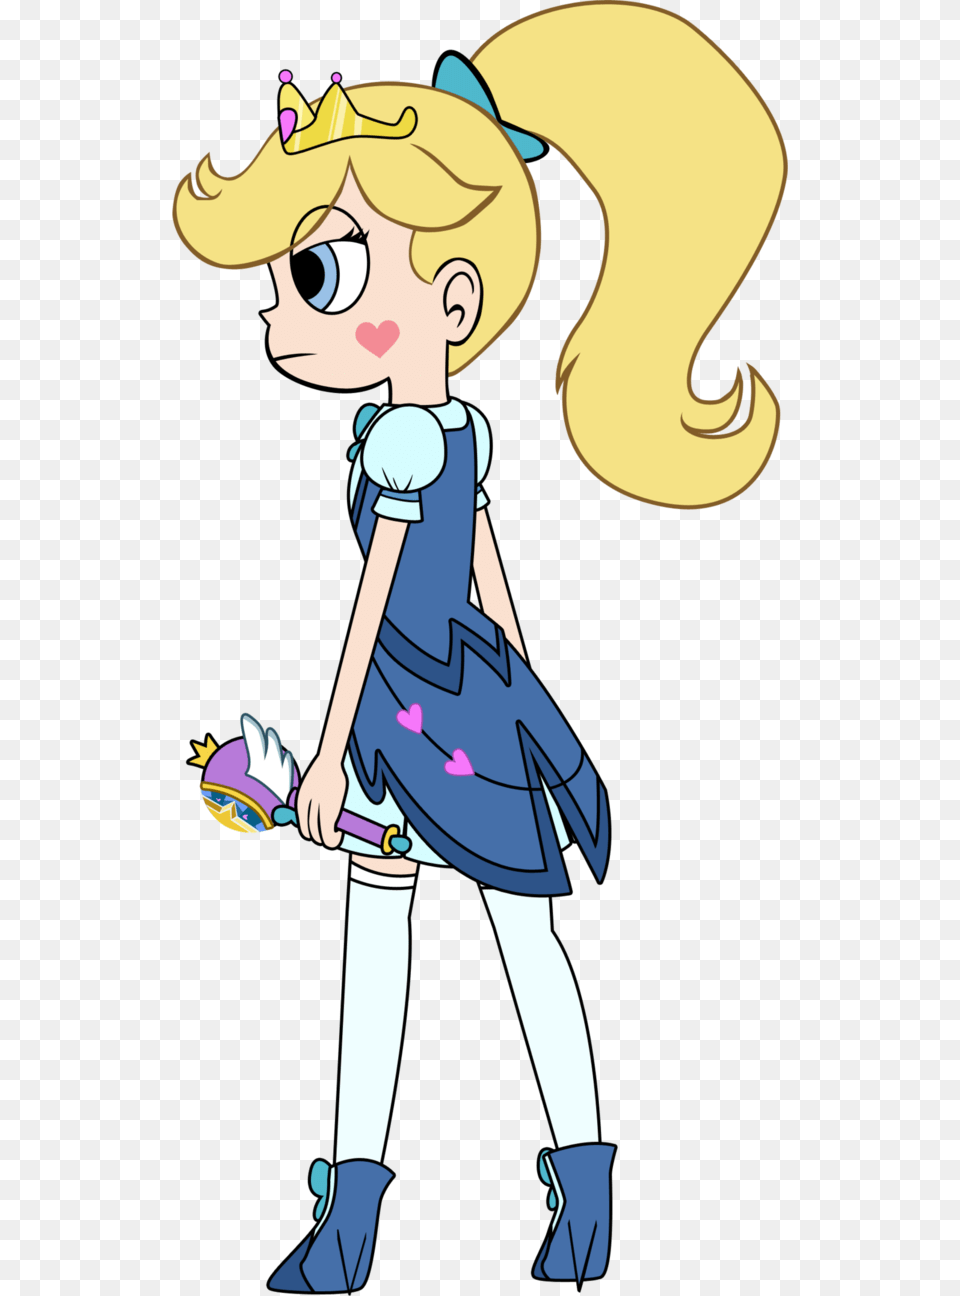 Royalty Star Butterfly By Aerenarie Dibujos De La Star Butterfly, Cartoon, Person, Book, Comics Png Image